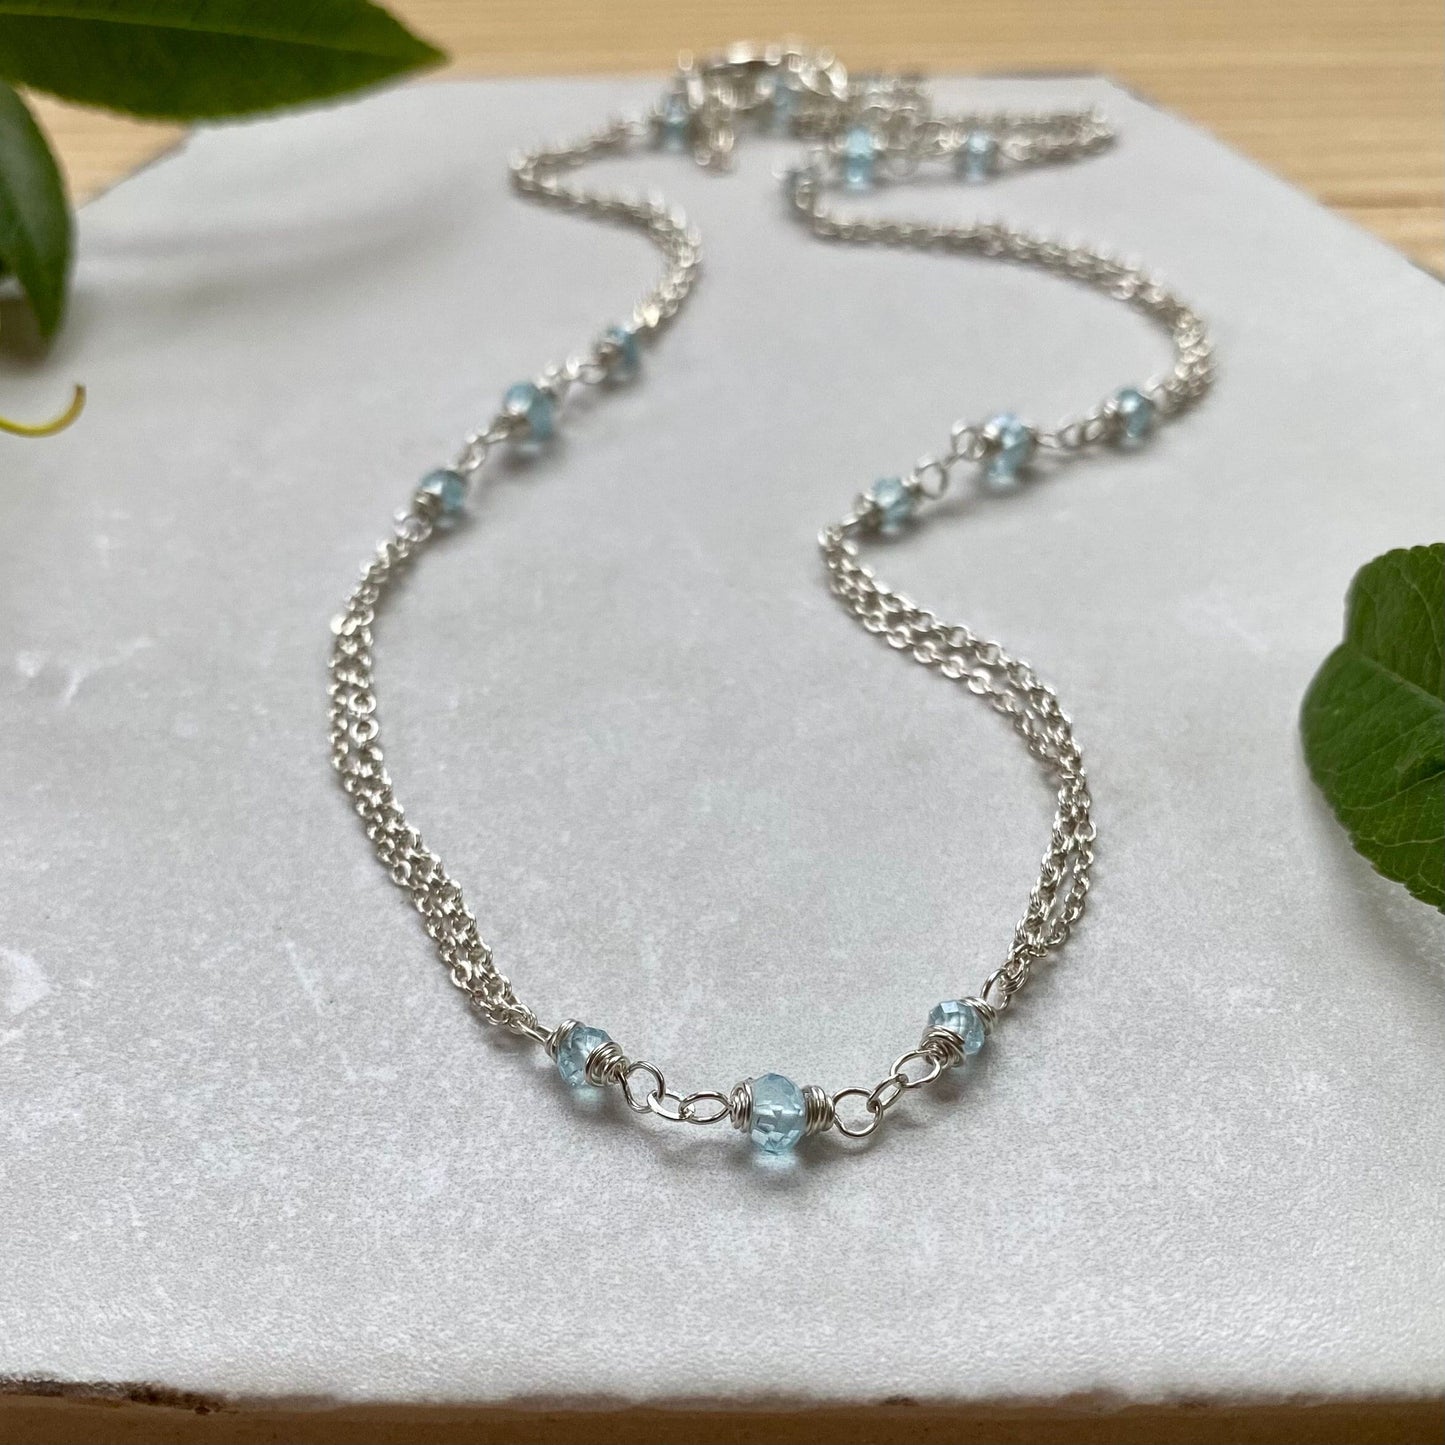 Birthstone Chain Necklace with Your Choice of Gemstones, Sterling Silver Elegant Double Chain Layering Necklace